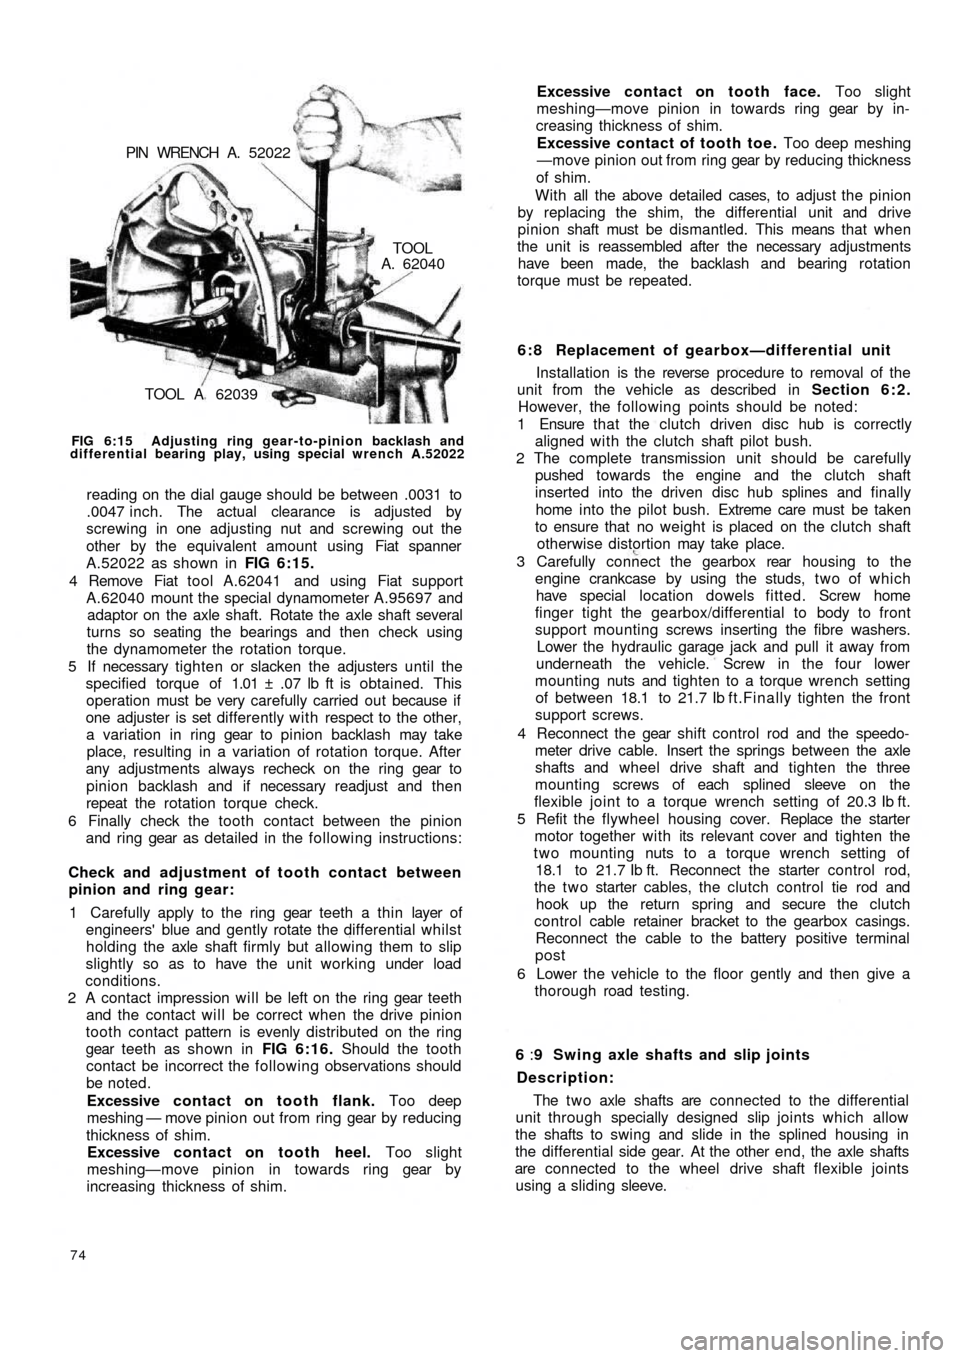 FIAT 500 1957 1.G Workshop Manual TOOL A  62039
TOOLA. 62040 PIN  WRENCH  A.  52022
FIG 6:15  Adjusting ring gear-to-pinion backlash and
differential bearing play, using special wrench A.52022
reading on the dial gauge should be betwe